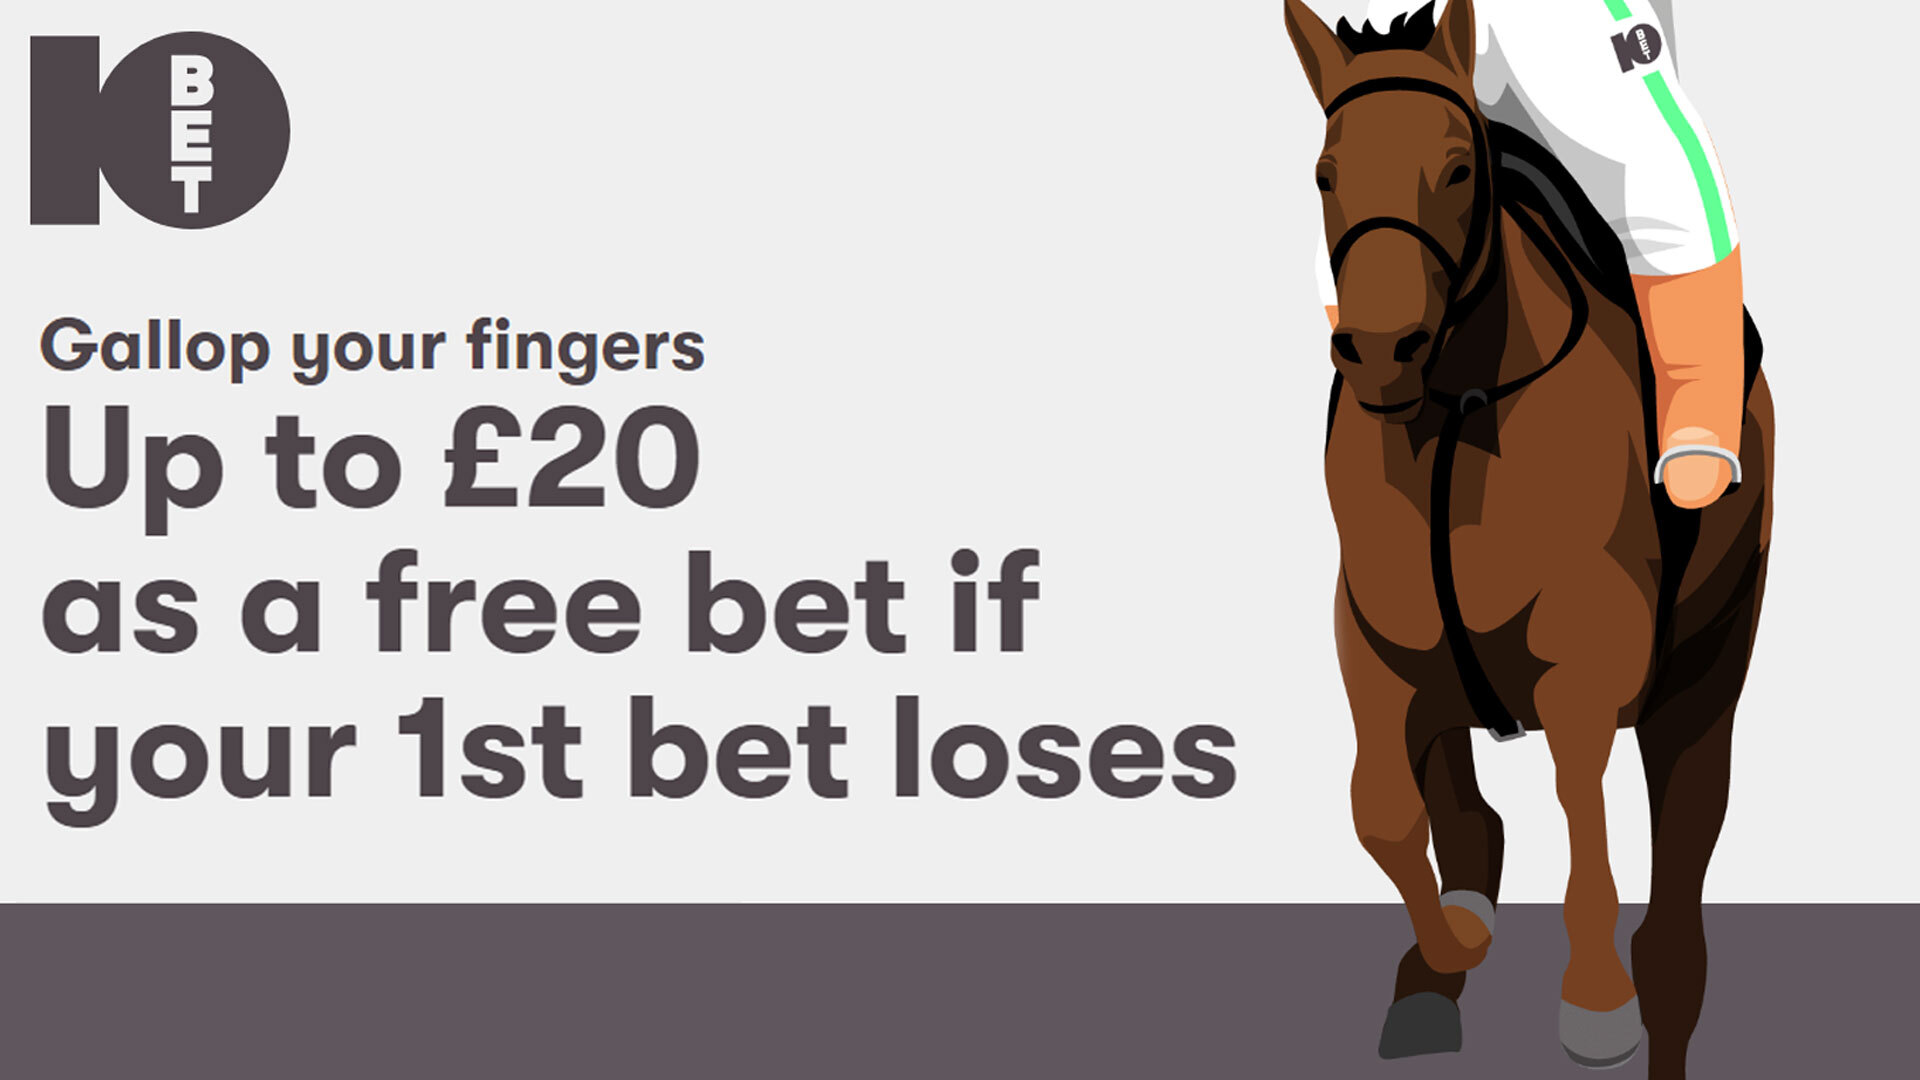 Horse racing bonus: Get a £20 FREE BET at Lingfield, Bellewstown or Wolverhampton today with 10bet